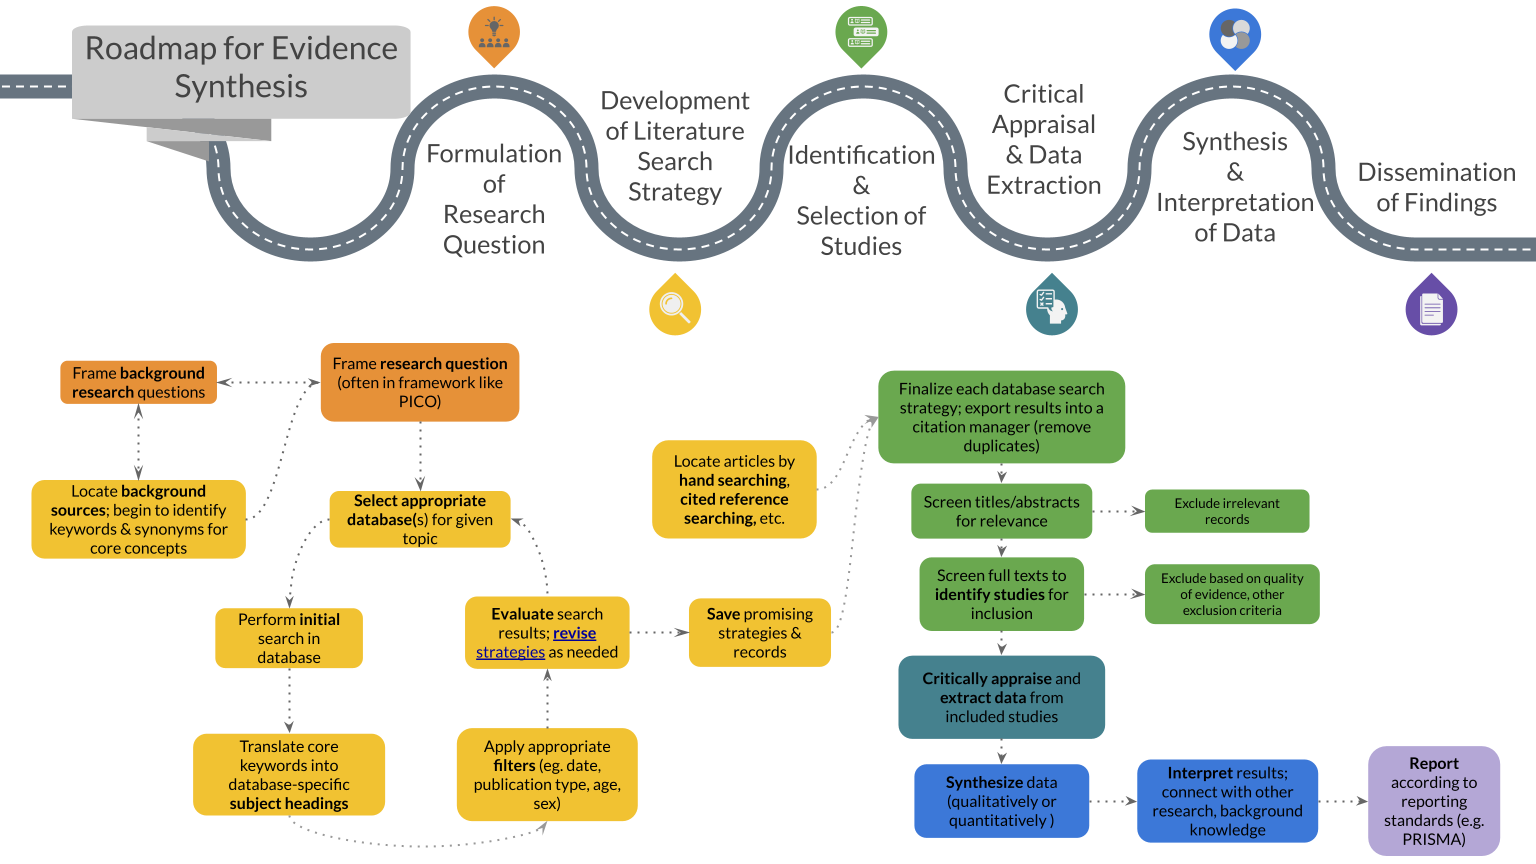 Flow chart of the roadmap for evidence synthesis.